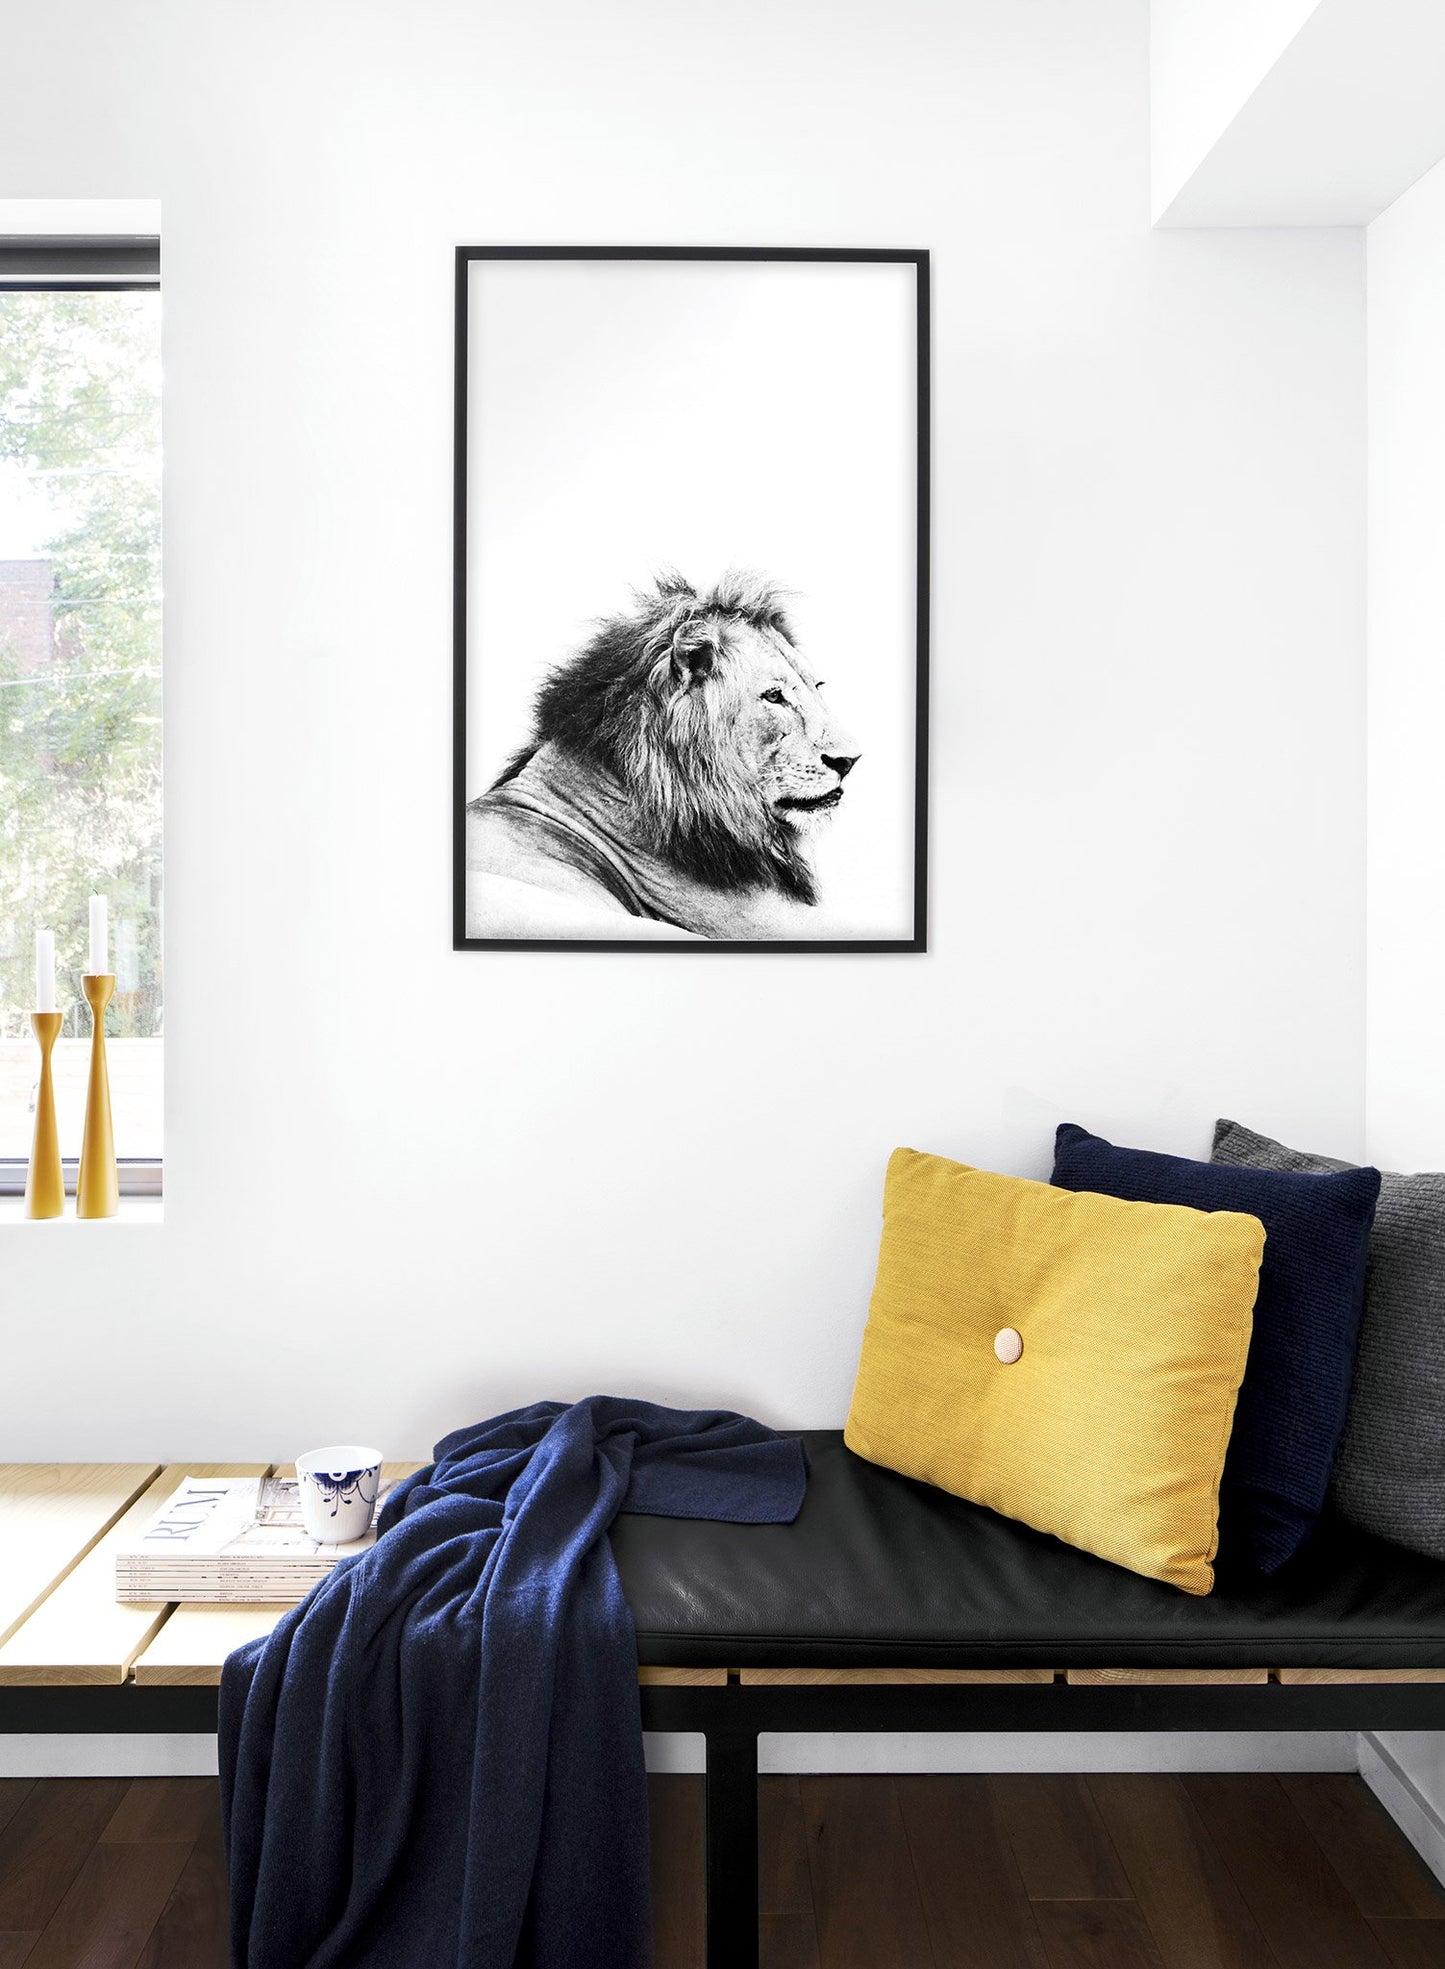 Kids nursery photography poster by Opposite Wall with Lion - Lifestyle - Bedroom